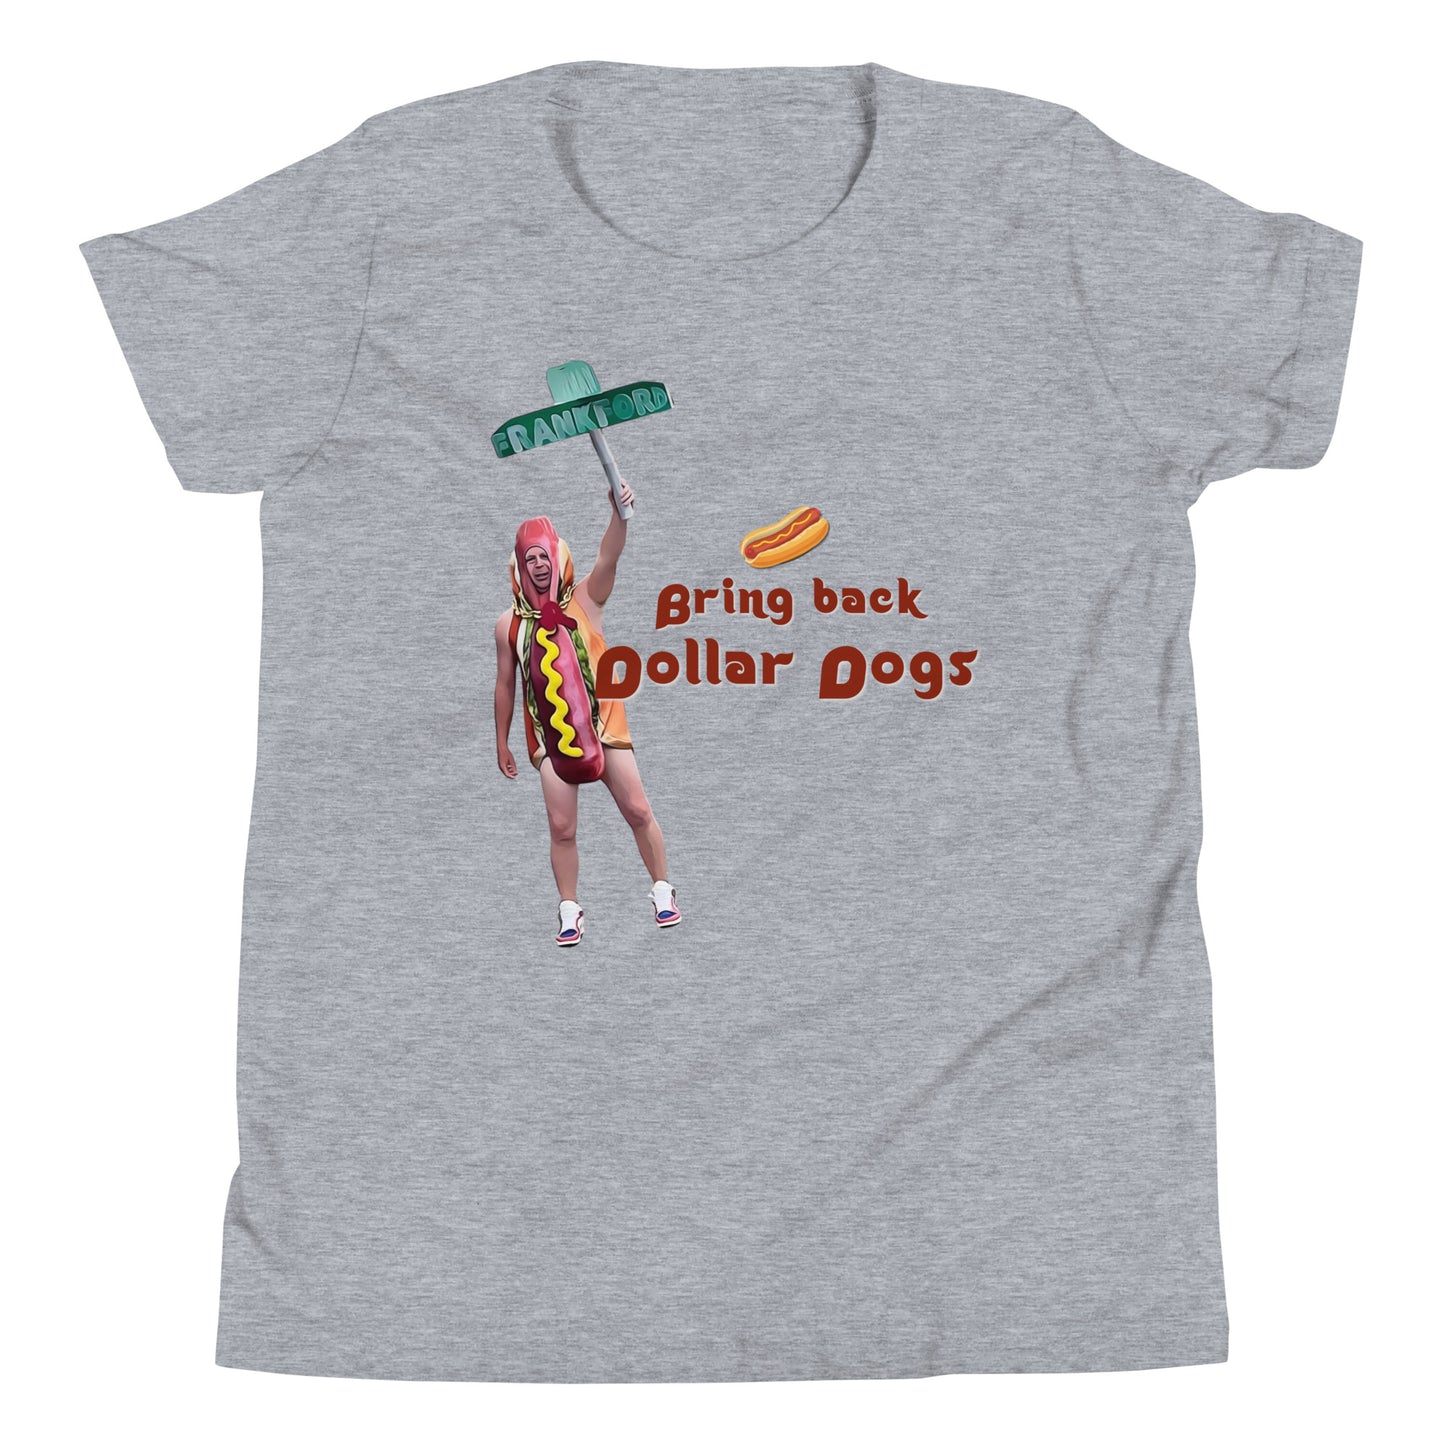 Bring Back Dollar Dogs - Youth Tee